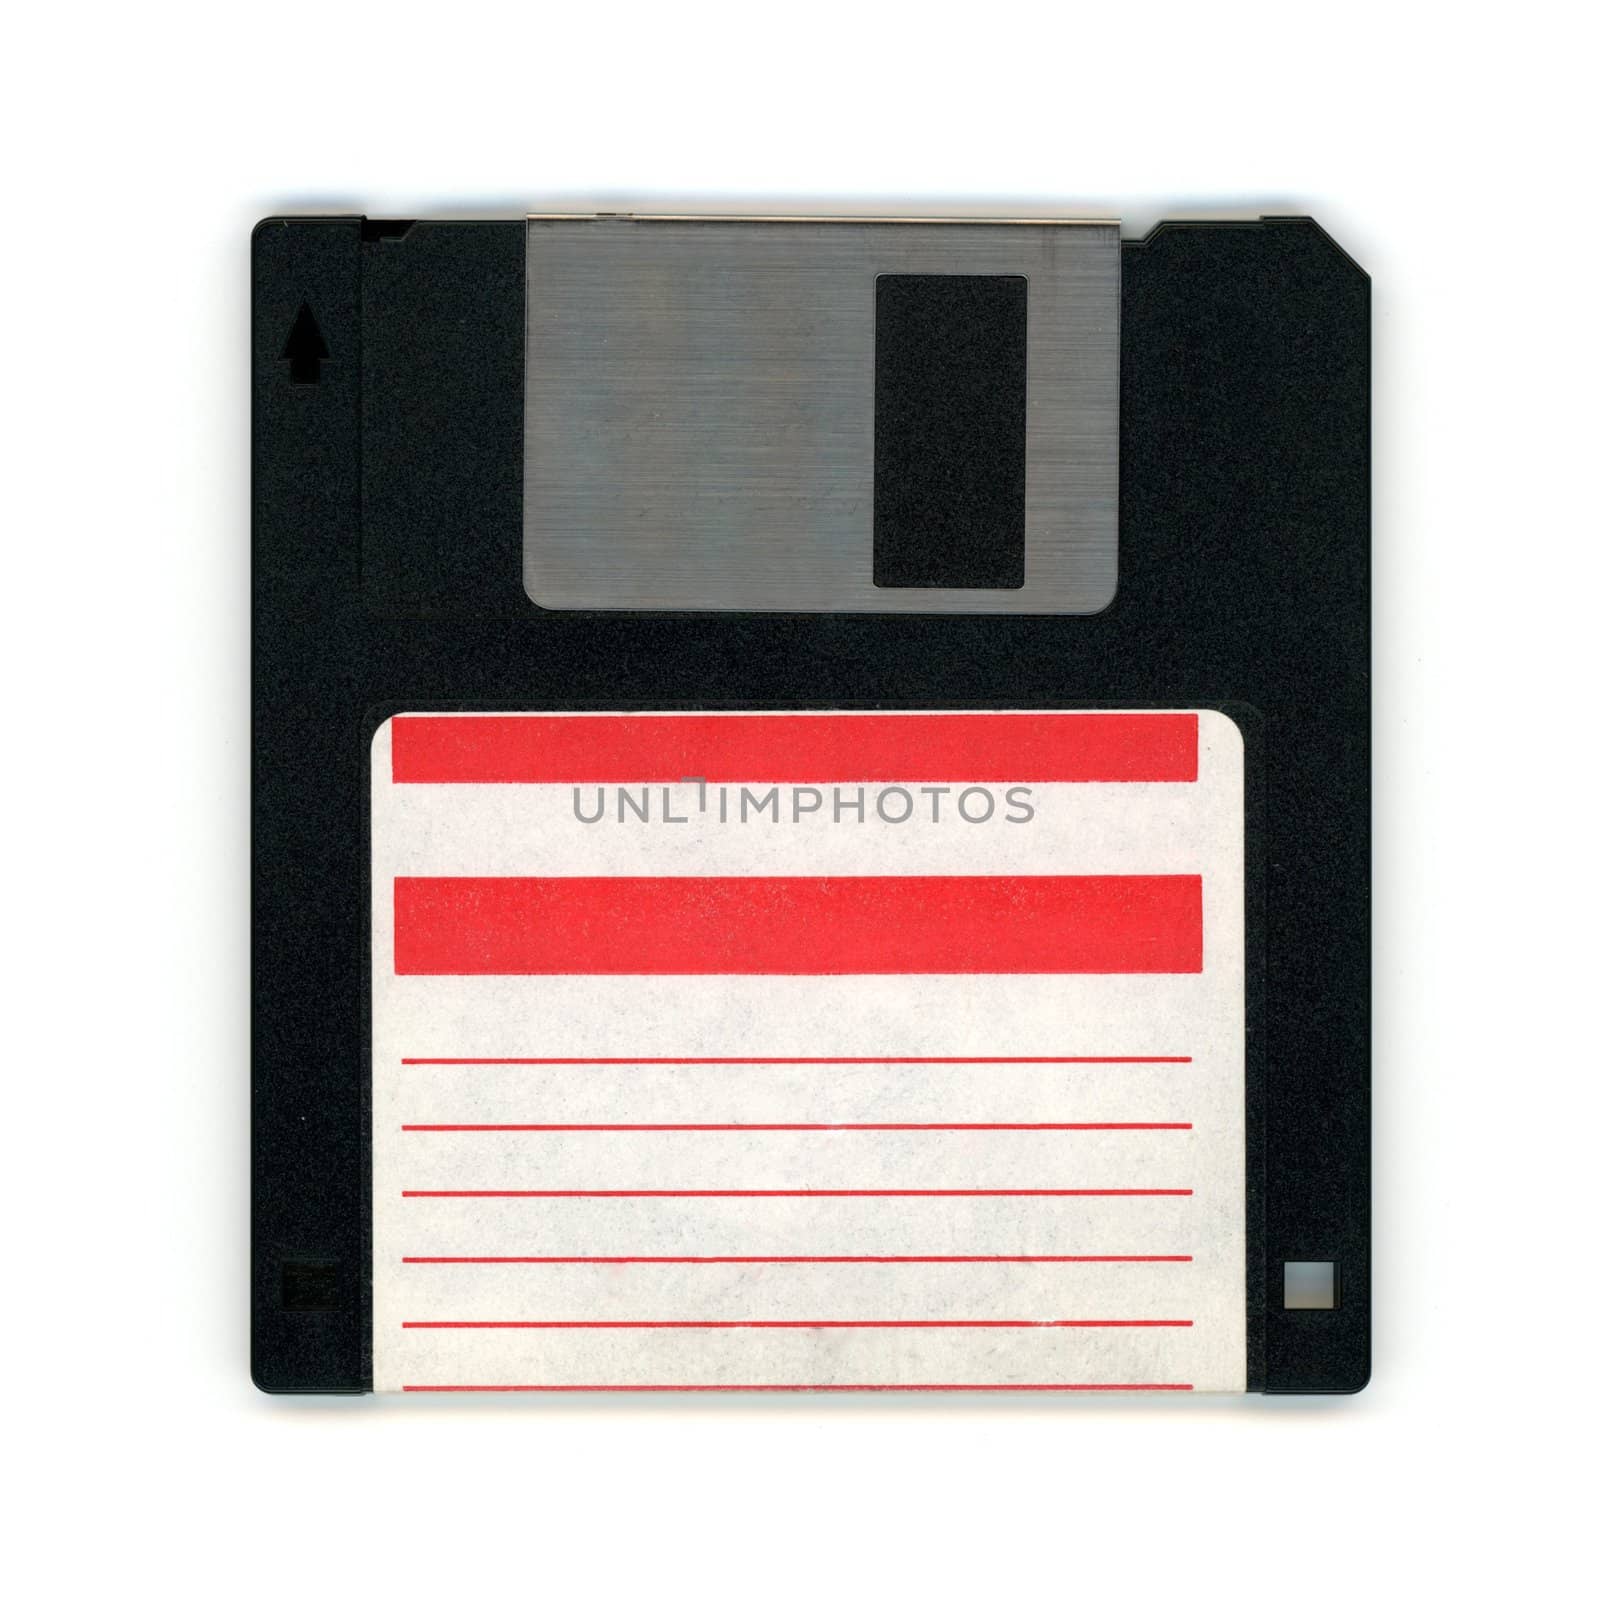 floppy disc for PC, front side by claudiodivizia